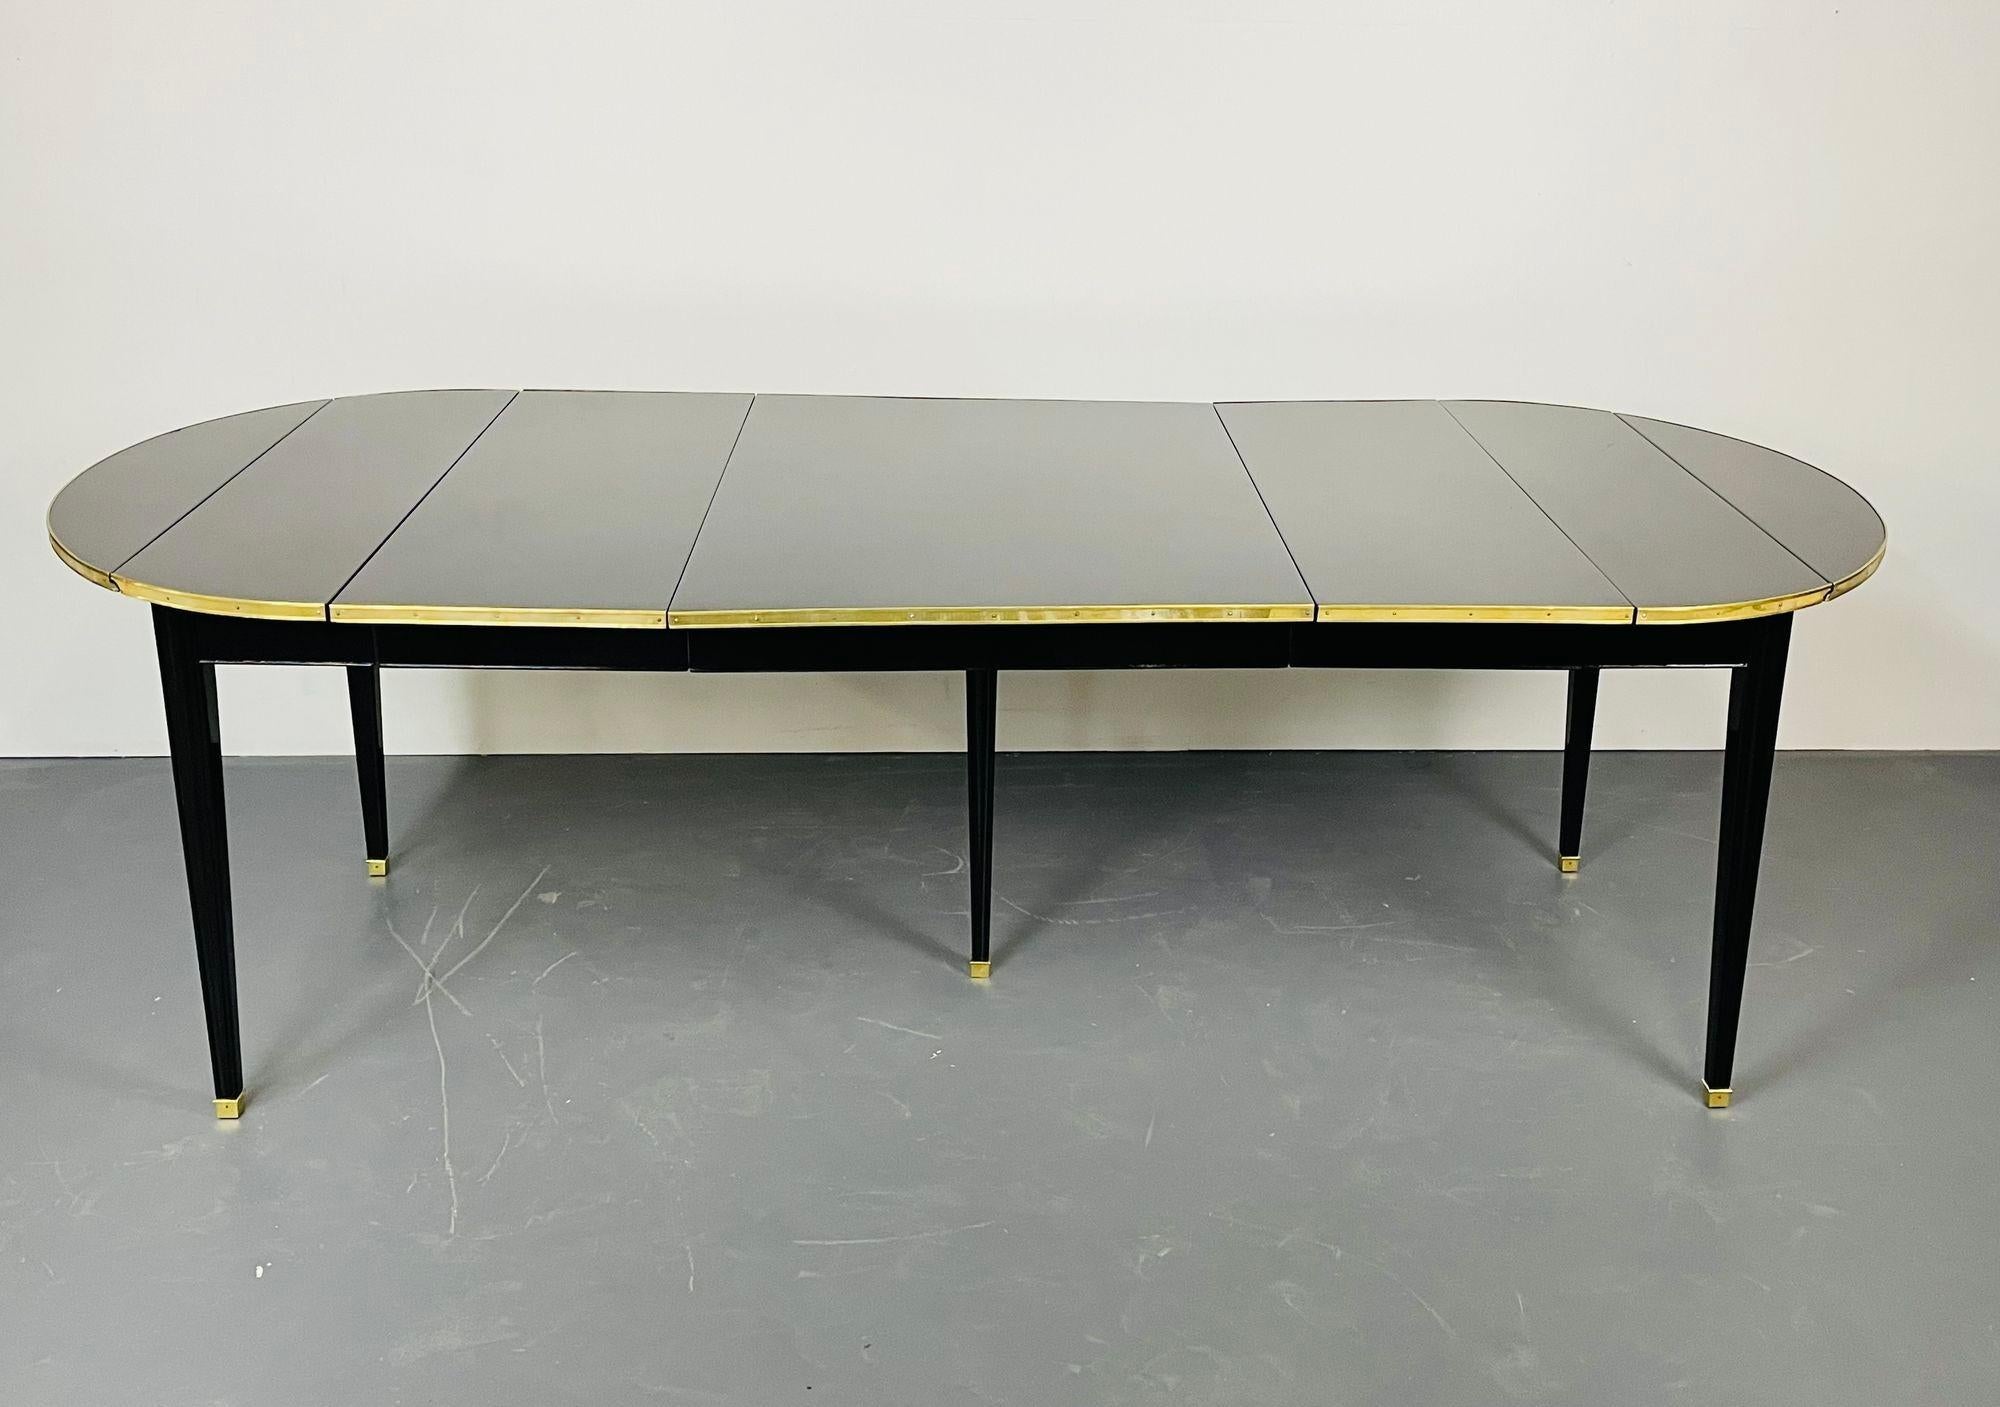 A Circular Dining Table, Hollywood Regency, Maison Jansen Style, Functional

A stunning dining table in the fashion of Jansen having drop sides and three leaves. This very versatile dining table collapses to a diminutive 38 by 20 inches and